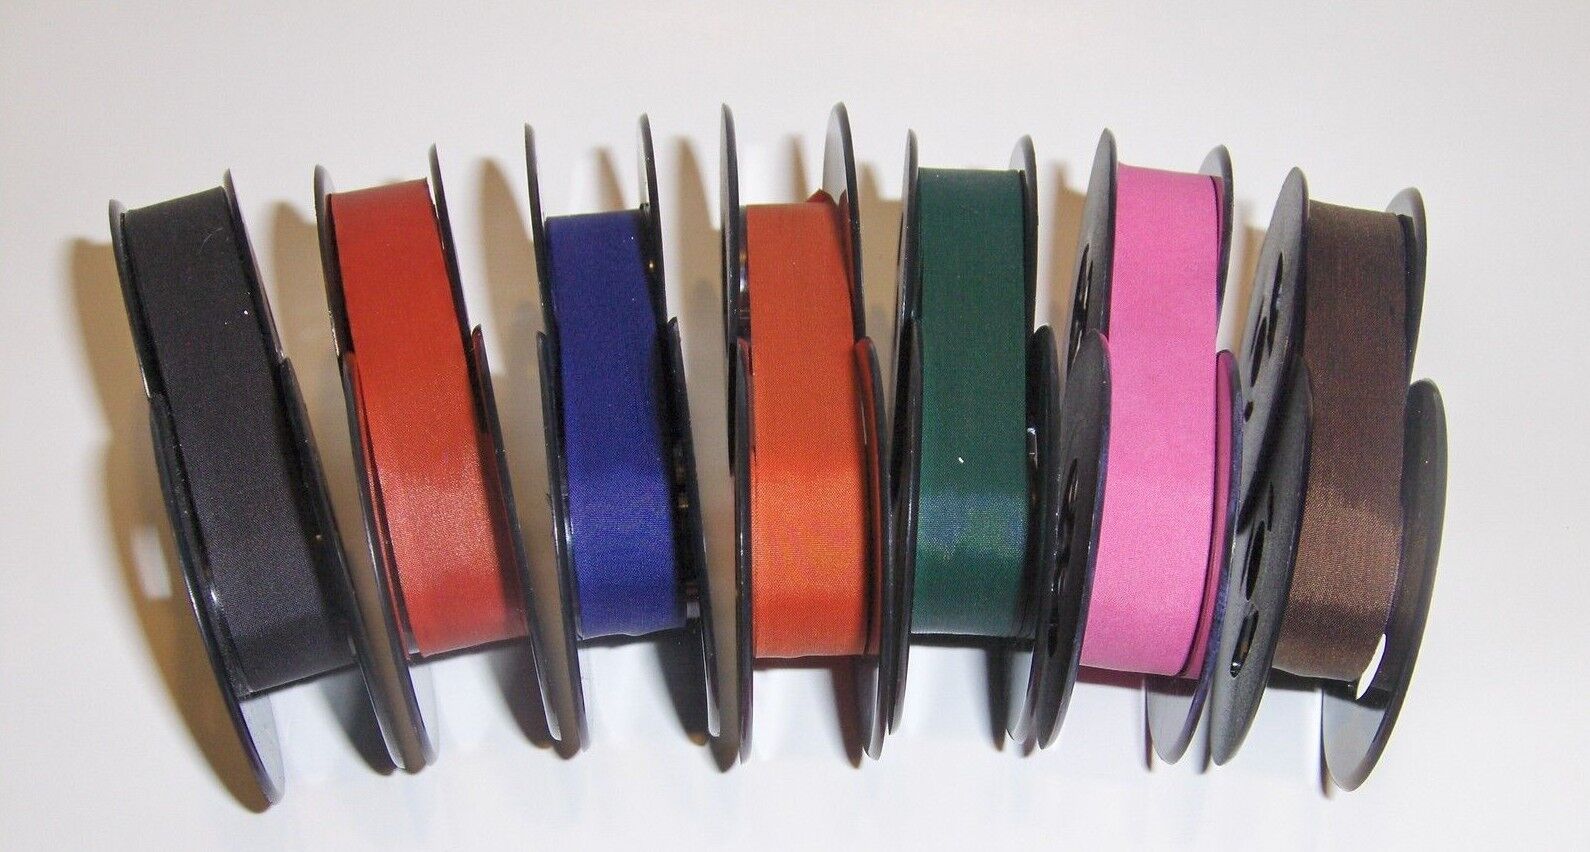 7 pack Colored Royal Quiet Deluxe Portable Typewriter Ribbons in new Colors